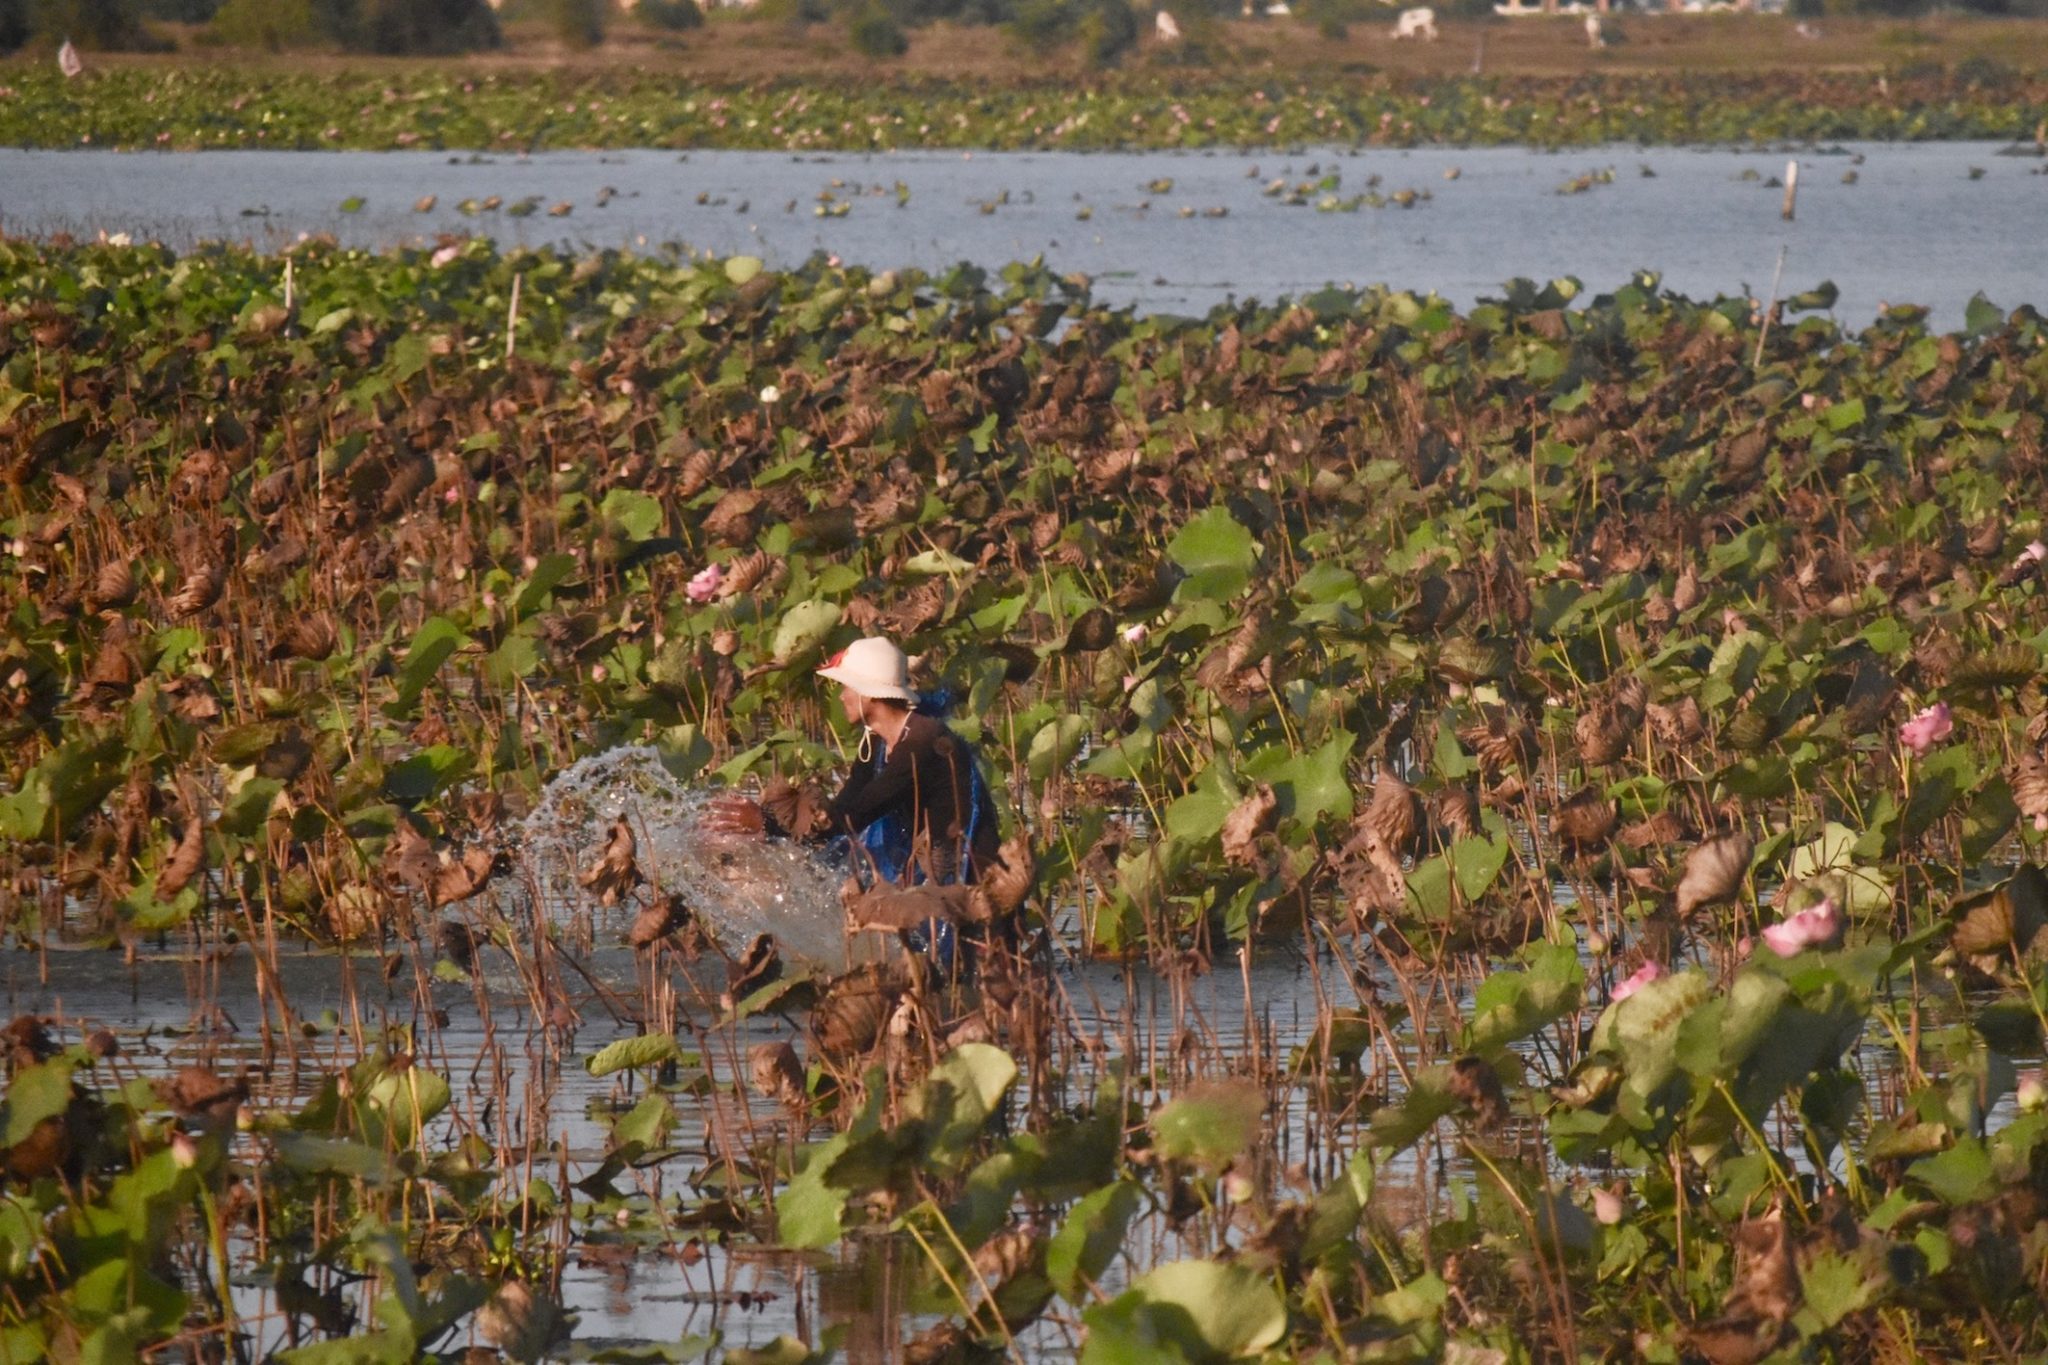 A man works in water surrounded by lilies 